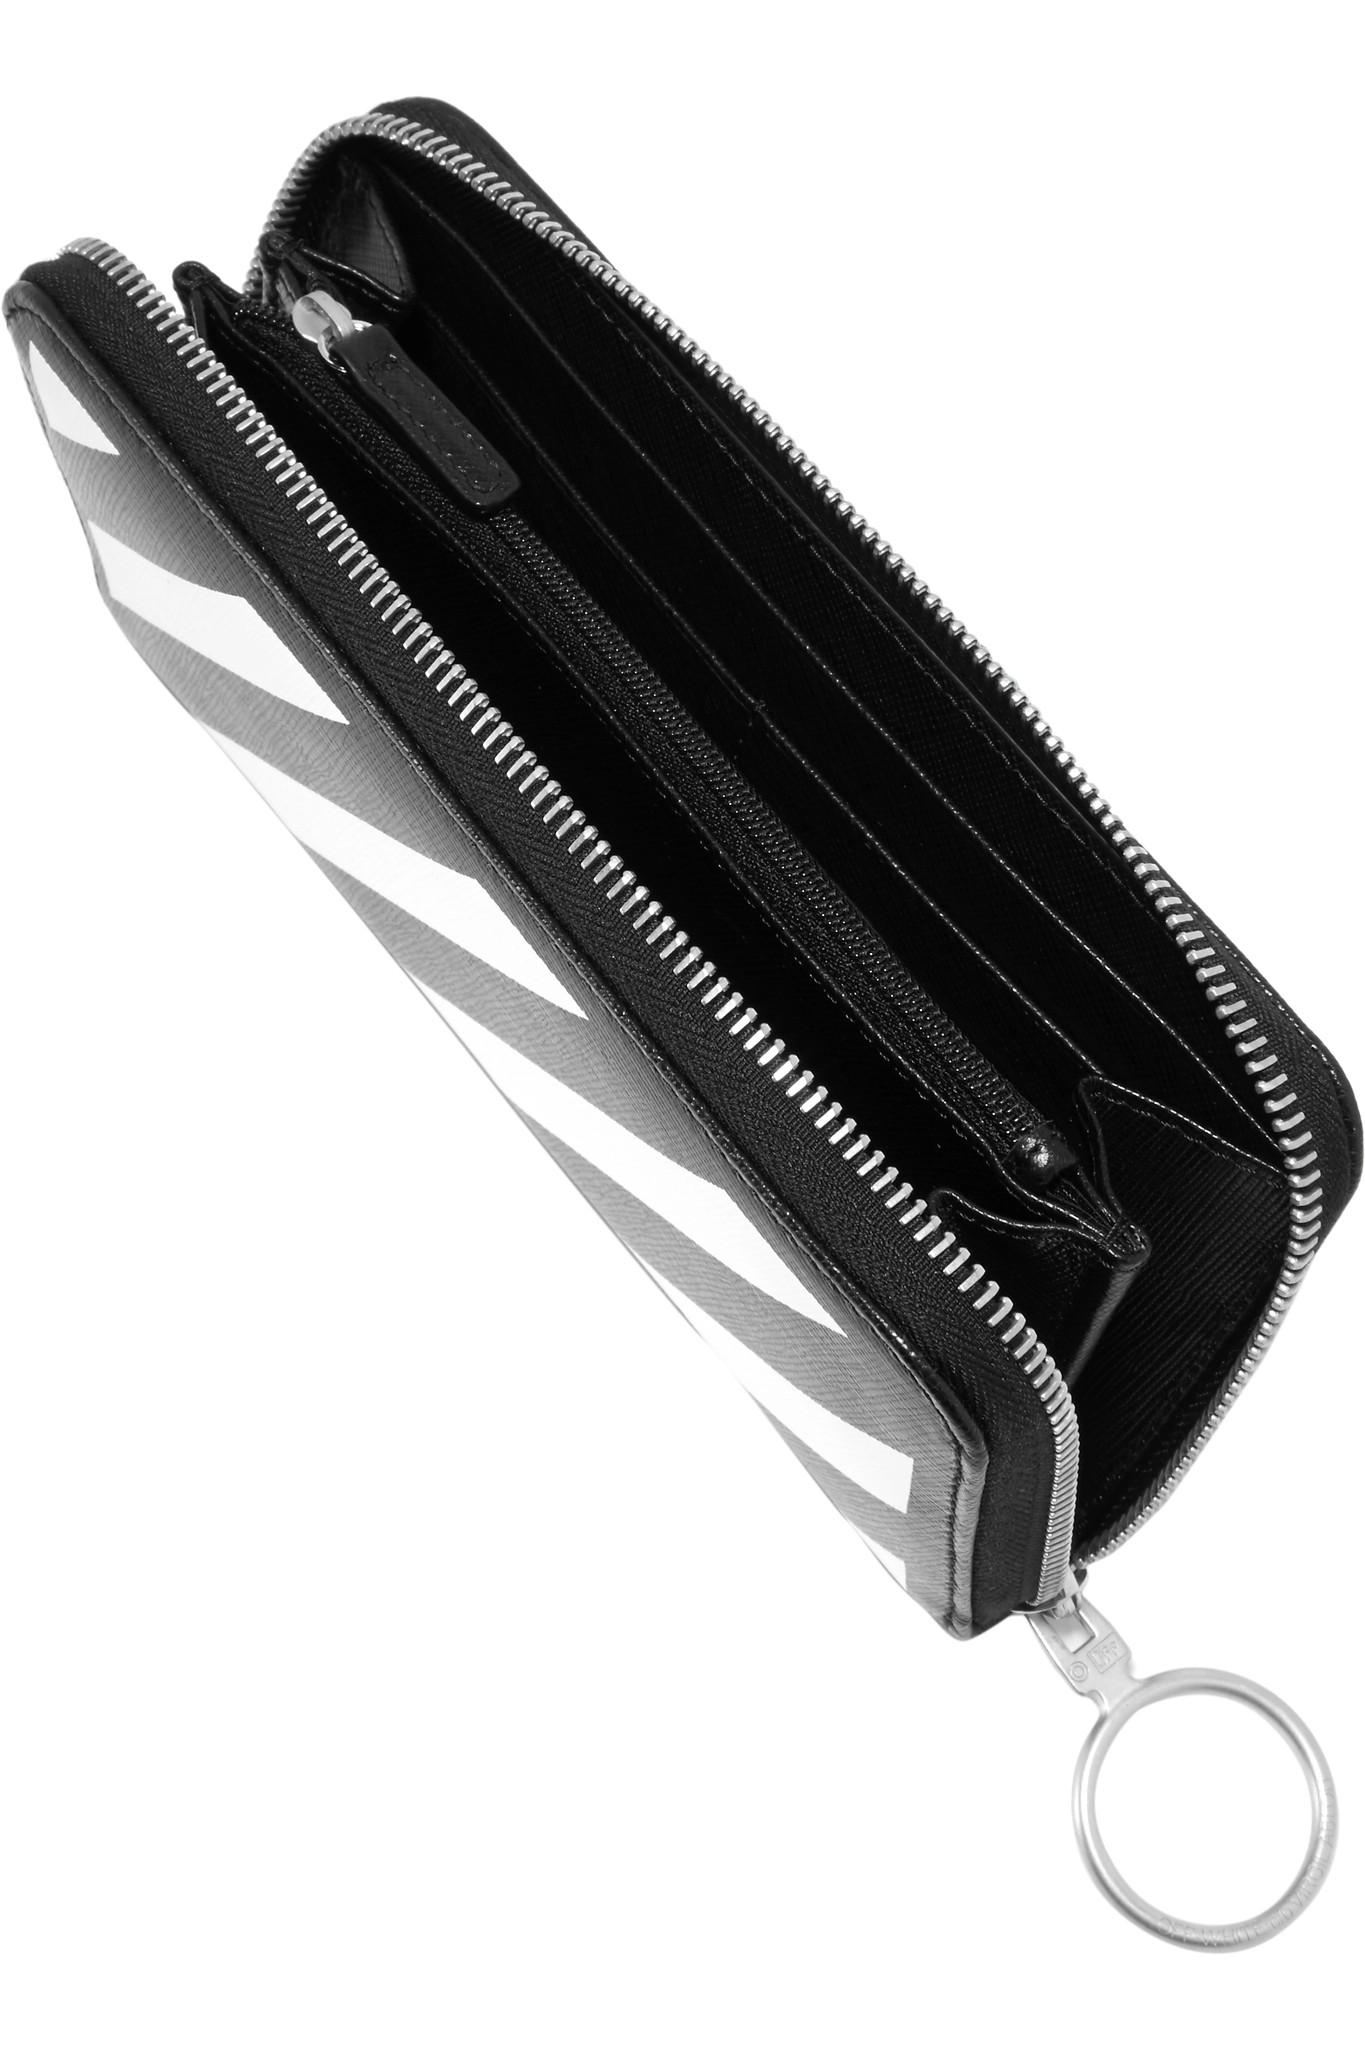 Off-White c/o Virgil Abloh Striped Medium Textured-leather Continental Wallet in Black - Lyst